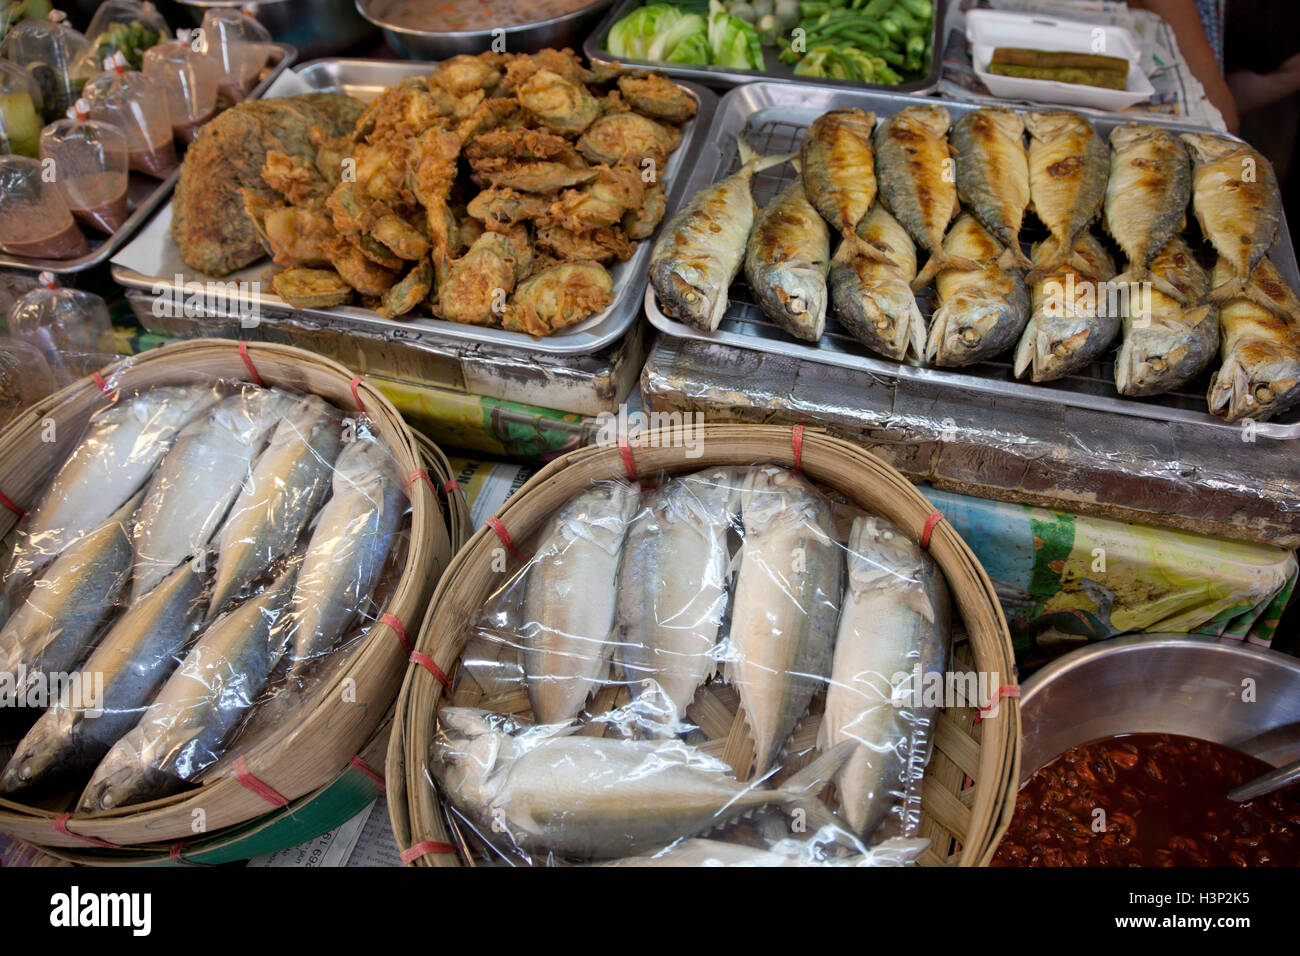 Grilled whole fishes and raw fishes and other foodstuffs for salt from a stall at Or Tor Gor market in Bangkok in Thailand. Stock Photo